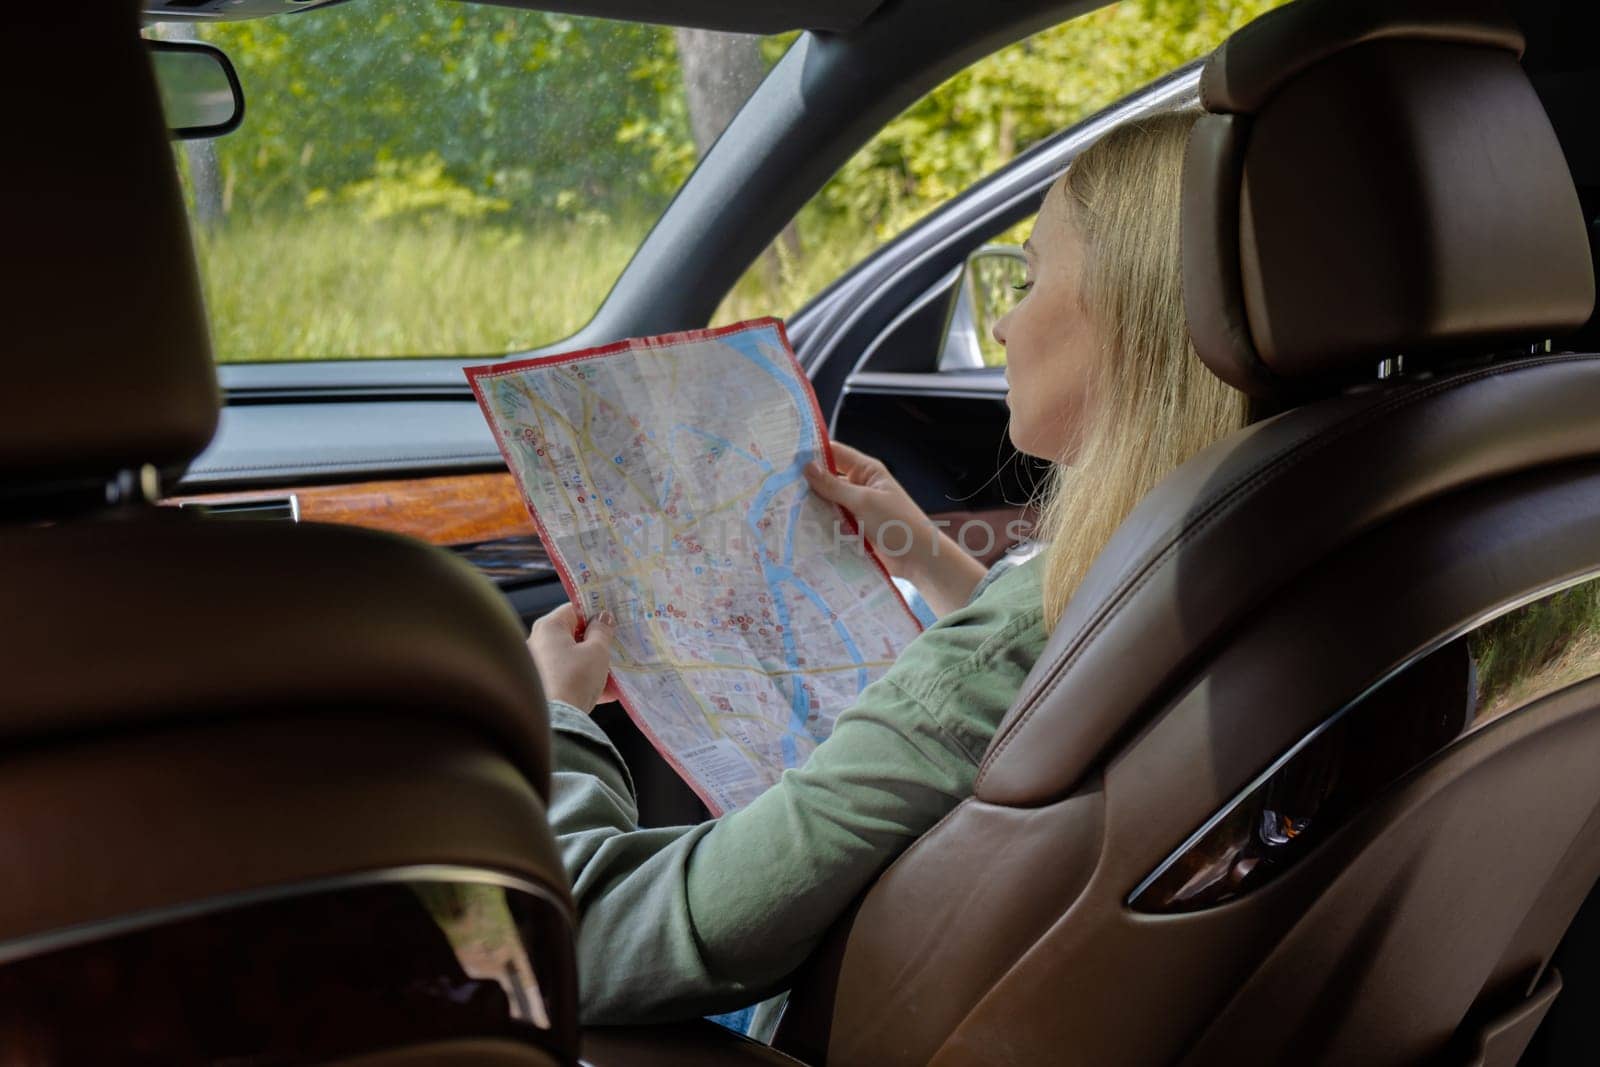 Smiling young woman sitting in car on road check the route on travel map. Local solo travel on weekends concept. Exited woman explore freedom outdoors in forest. Unity with nature lifestyle, rest recharge relaxation